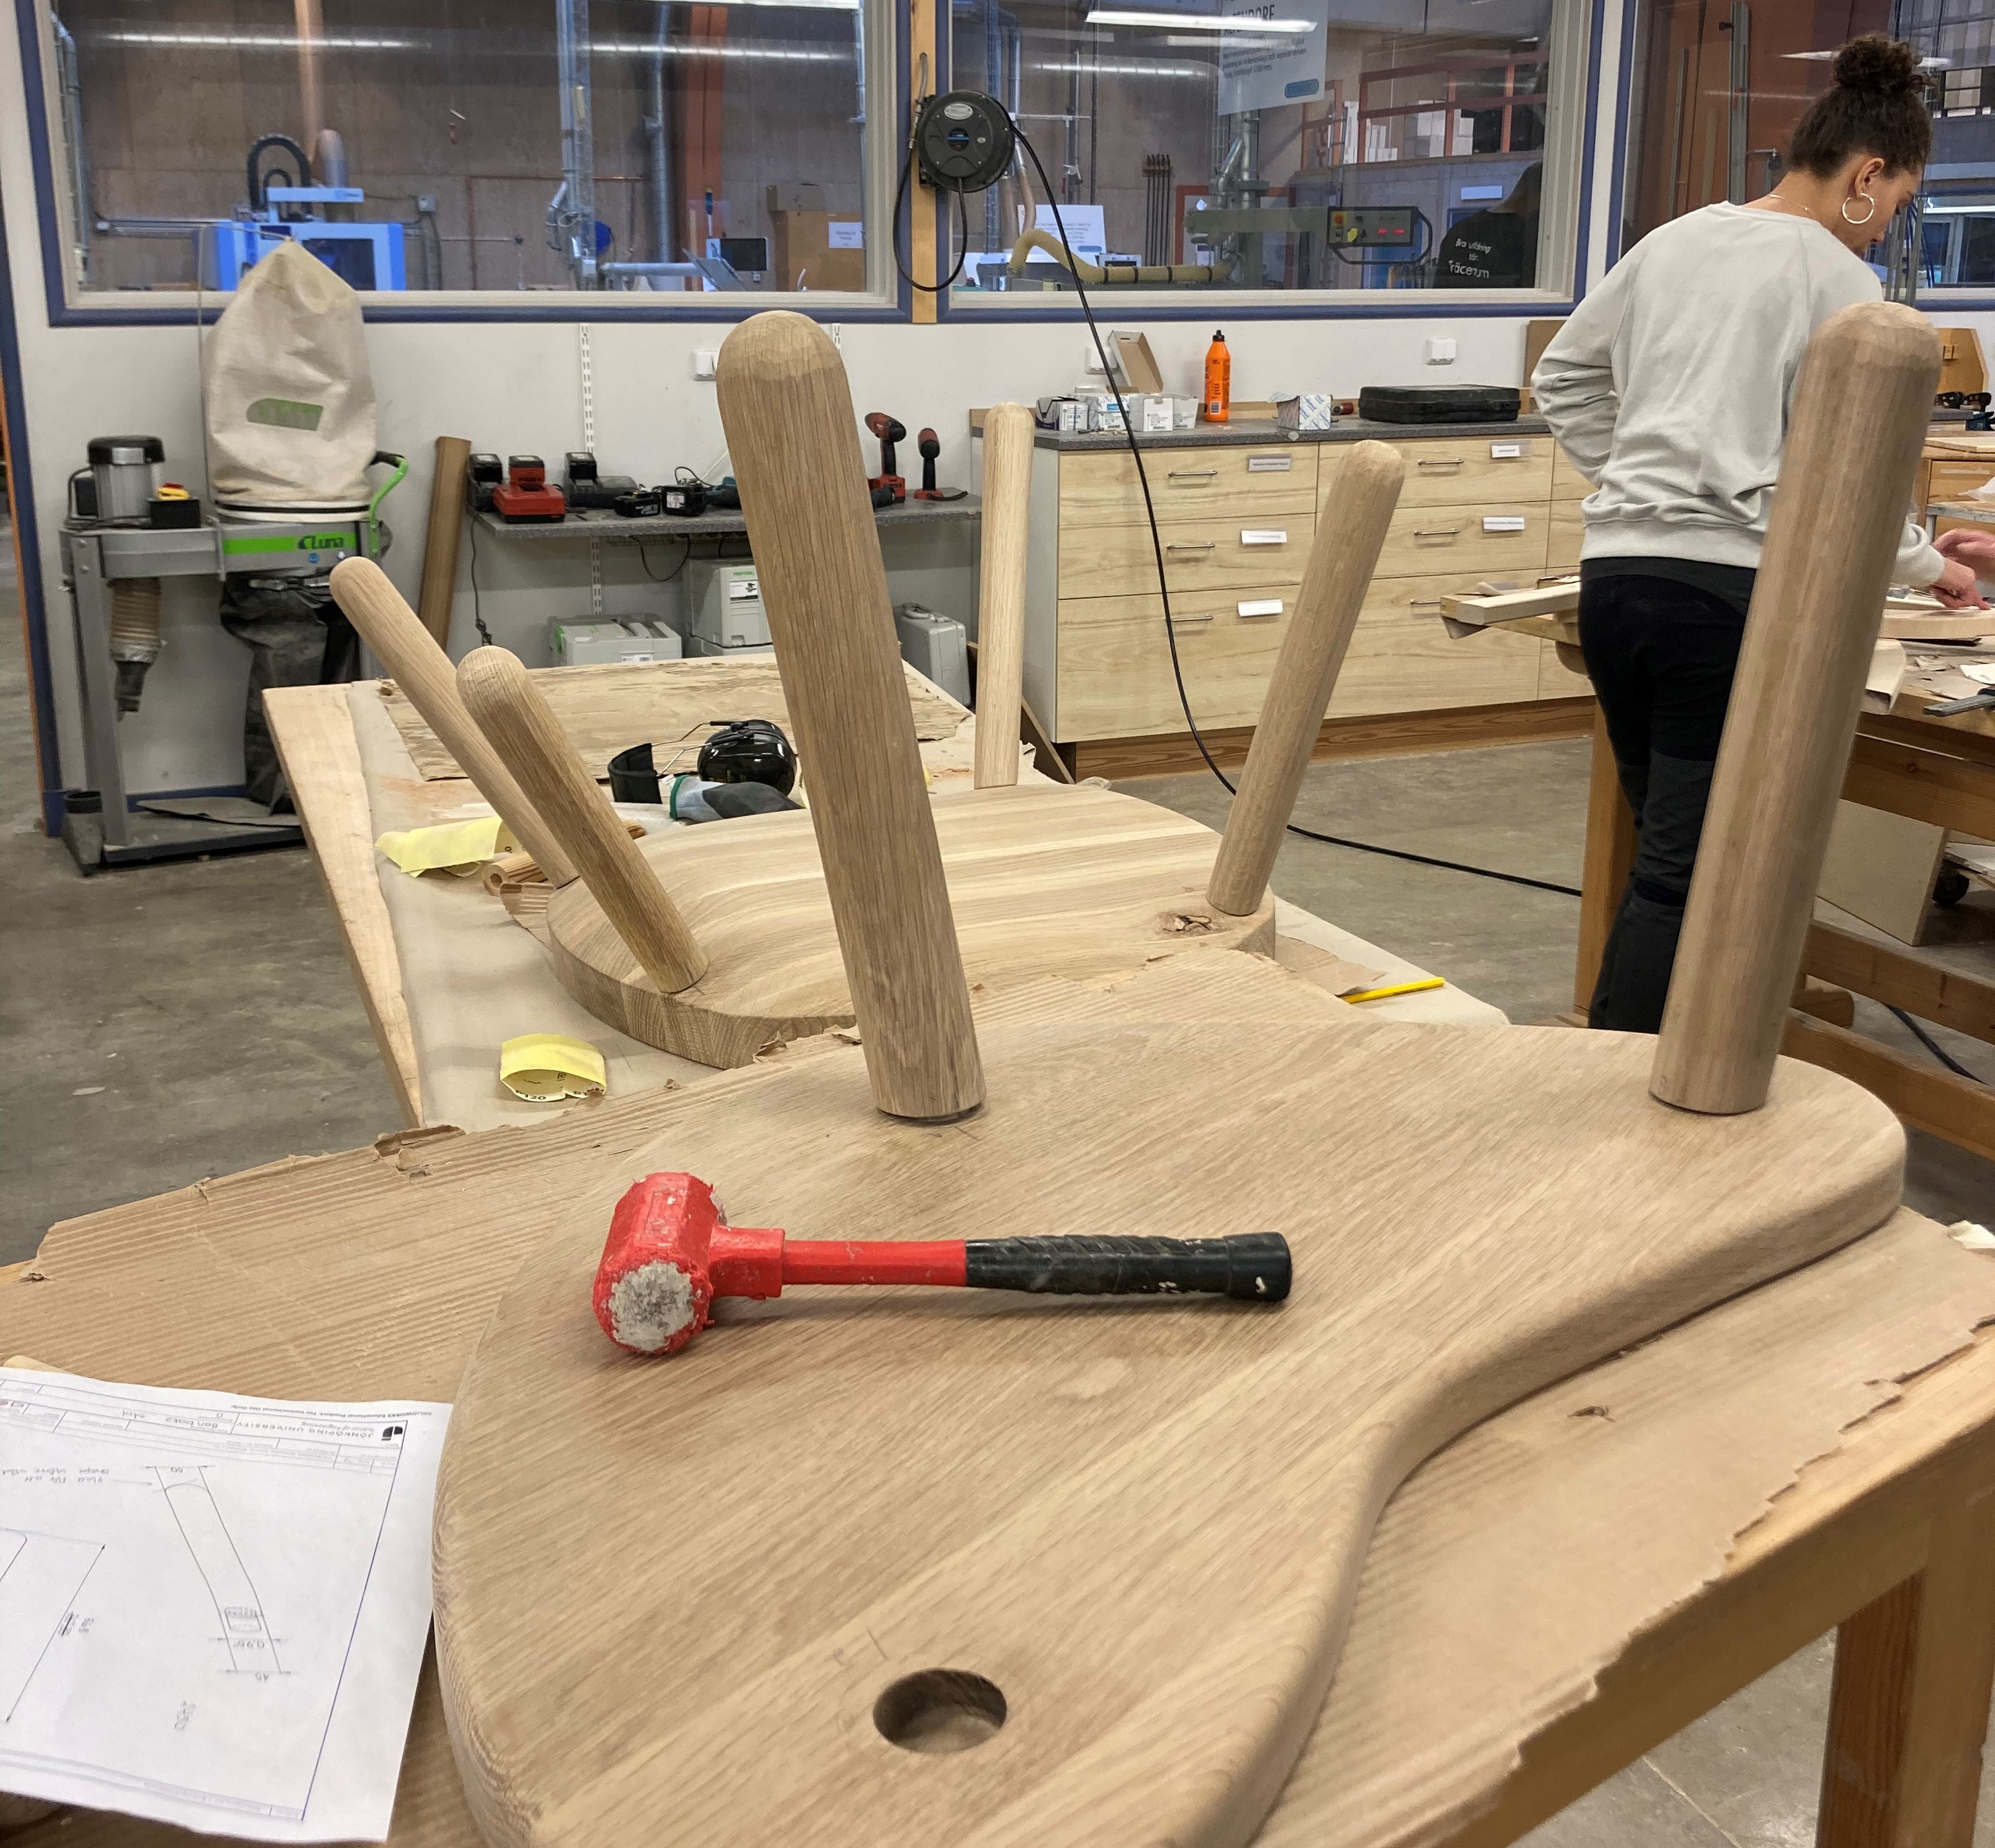 Student at the Product Development with Furniture Design programme.